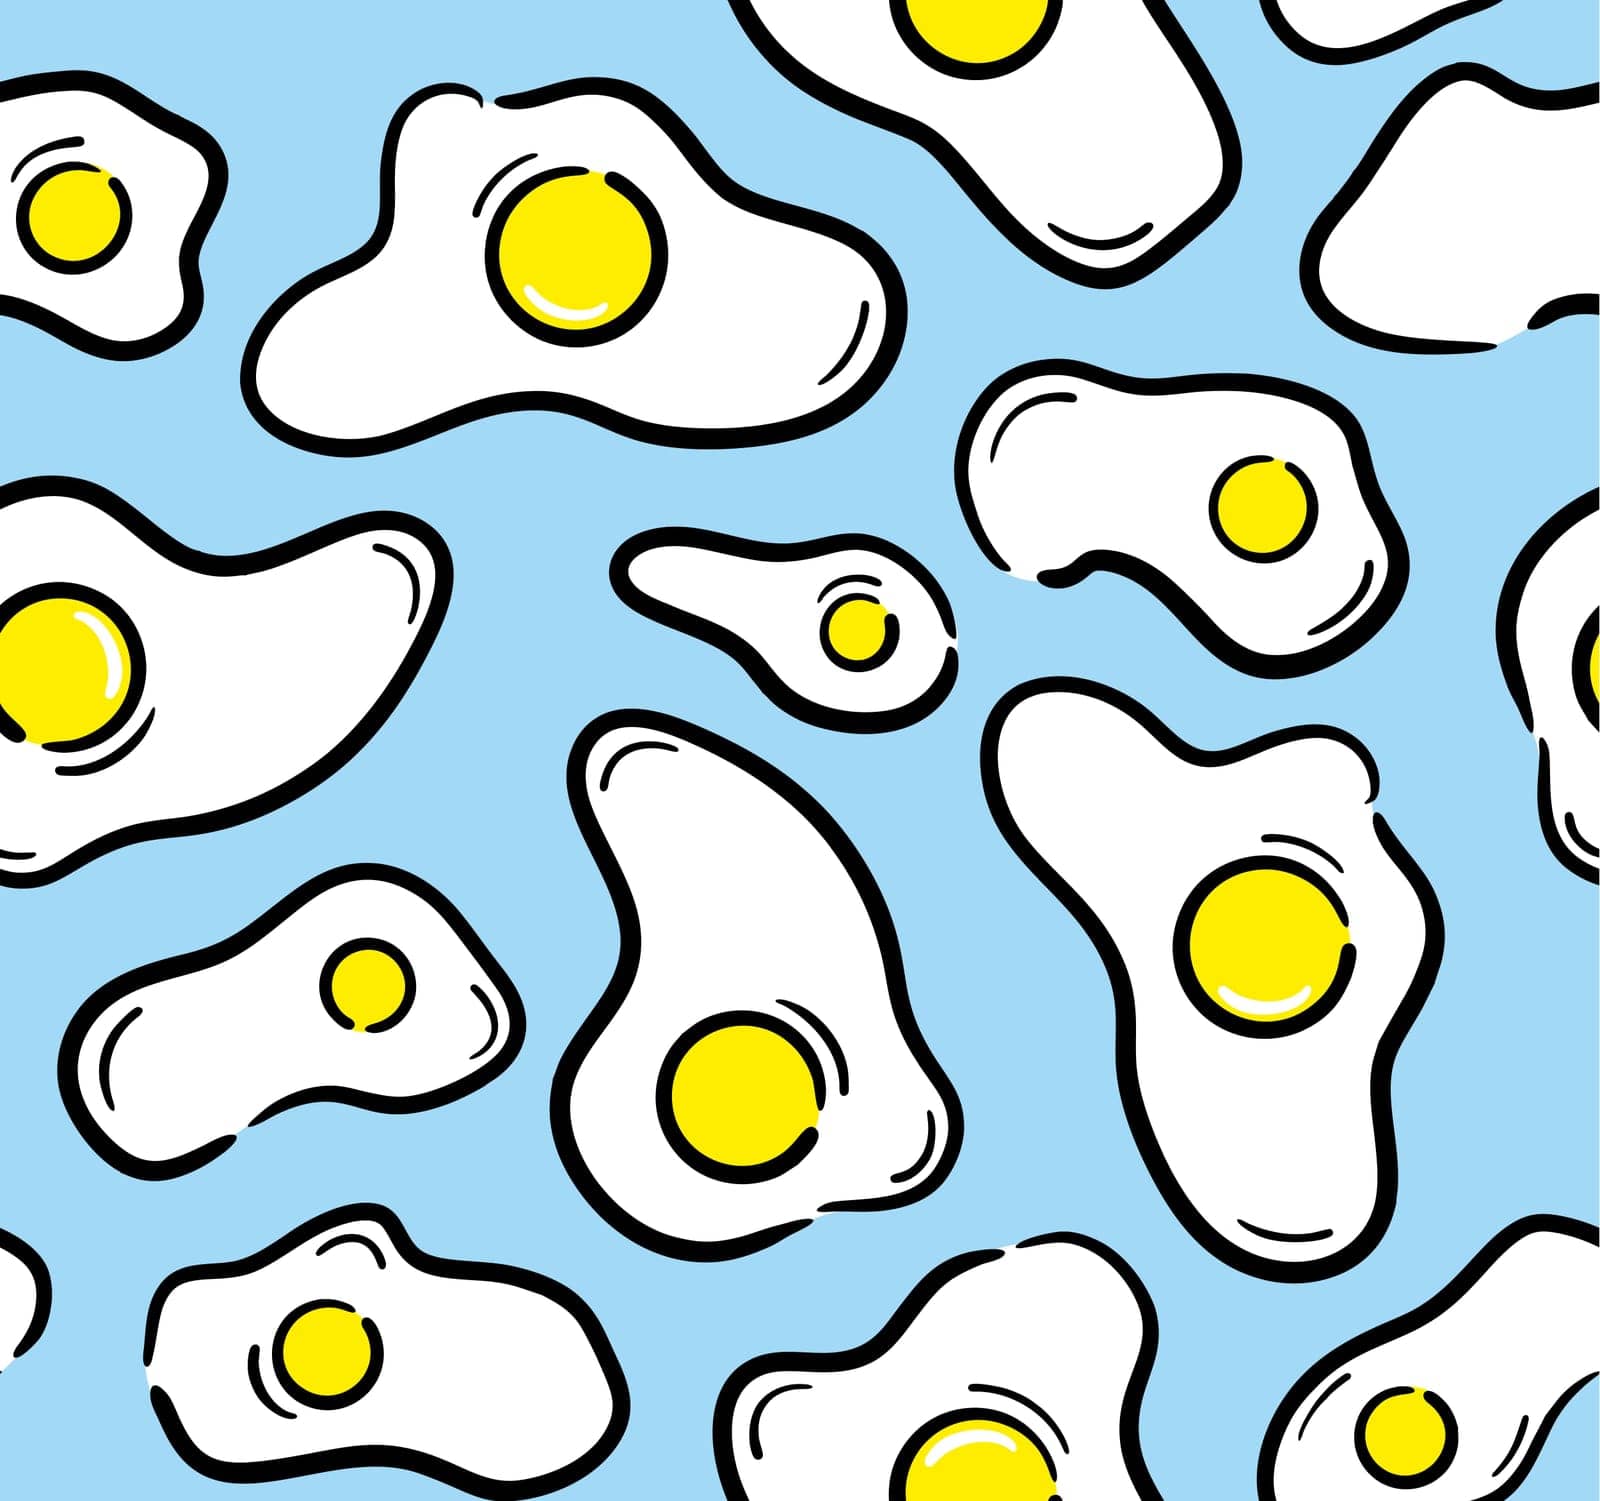 Fried eggs seamless pattern for morning breakfast. Food endless illustration on blue background.